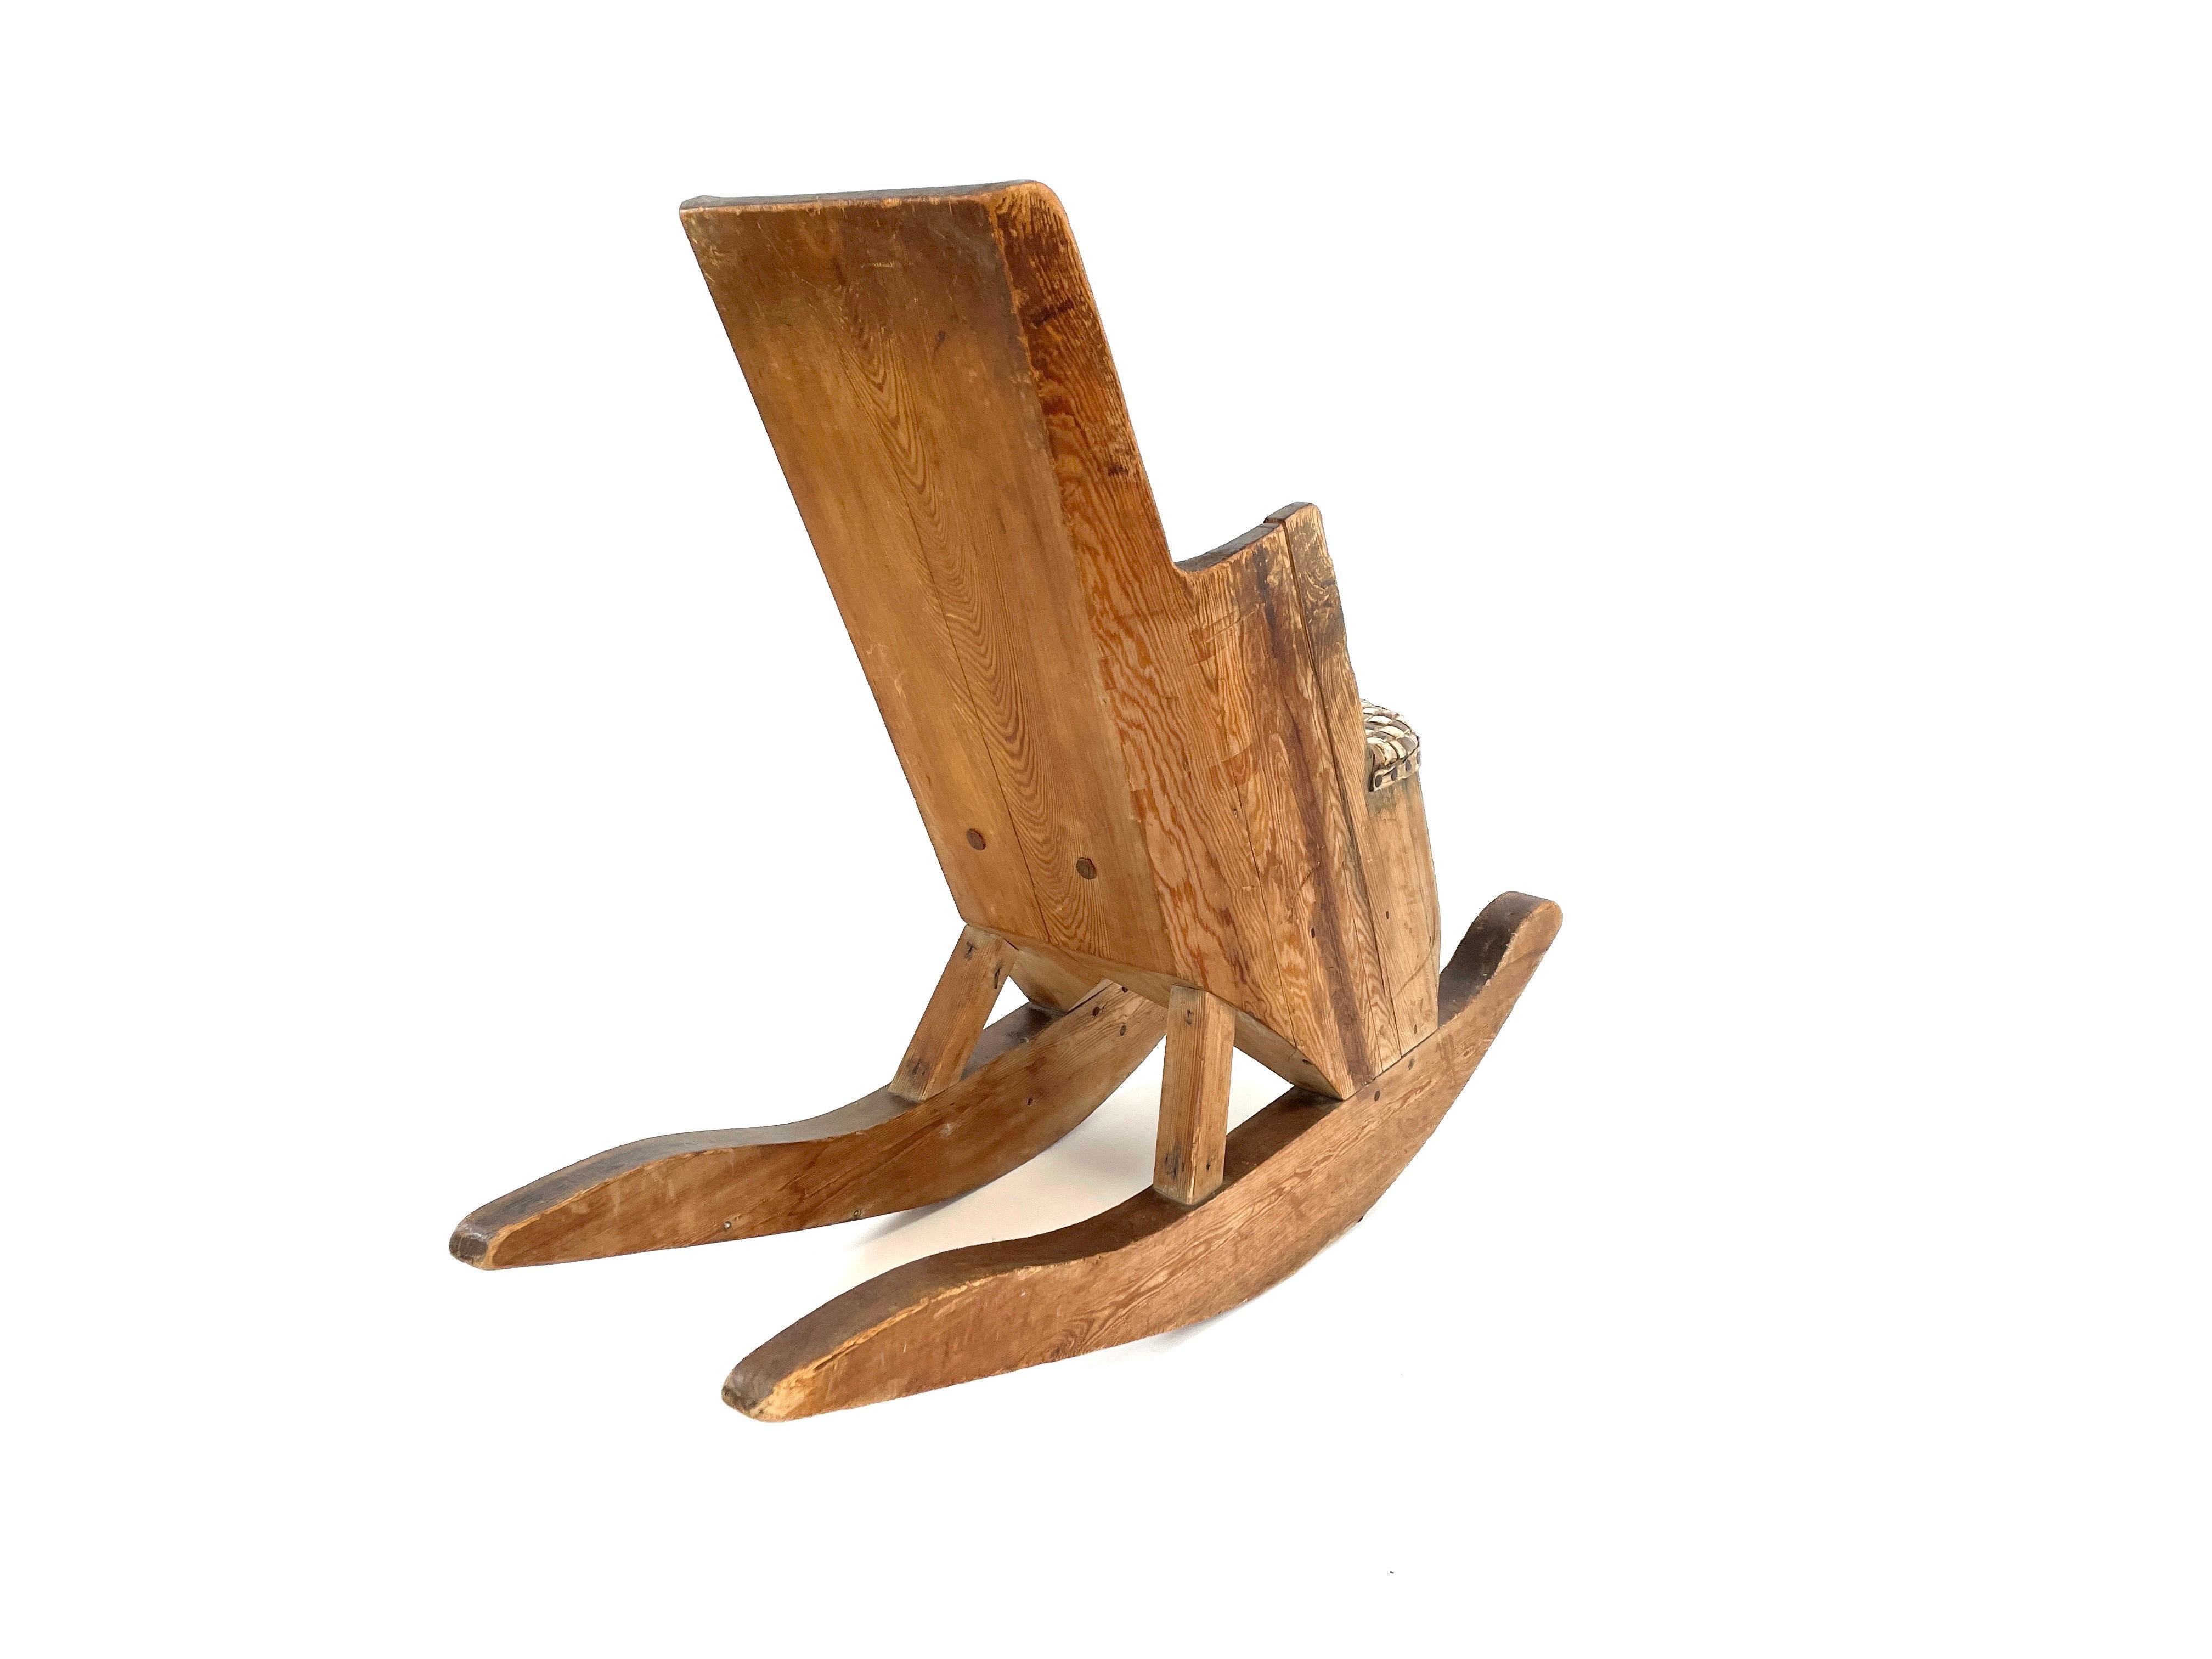 Step back in time with our charming and children's rocking chair, handcrafted in the early 1900s by an unknown talented Finnish artisan. This unique piece showcases Arts & Crafts design, featuring a birch bark seat and its solid condition ensures